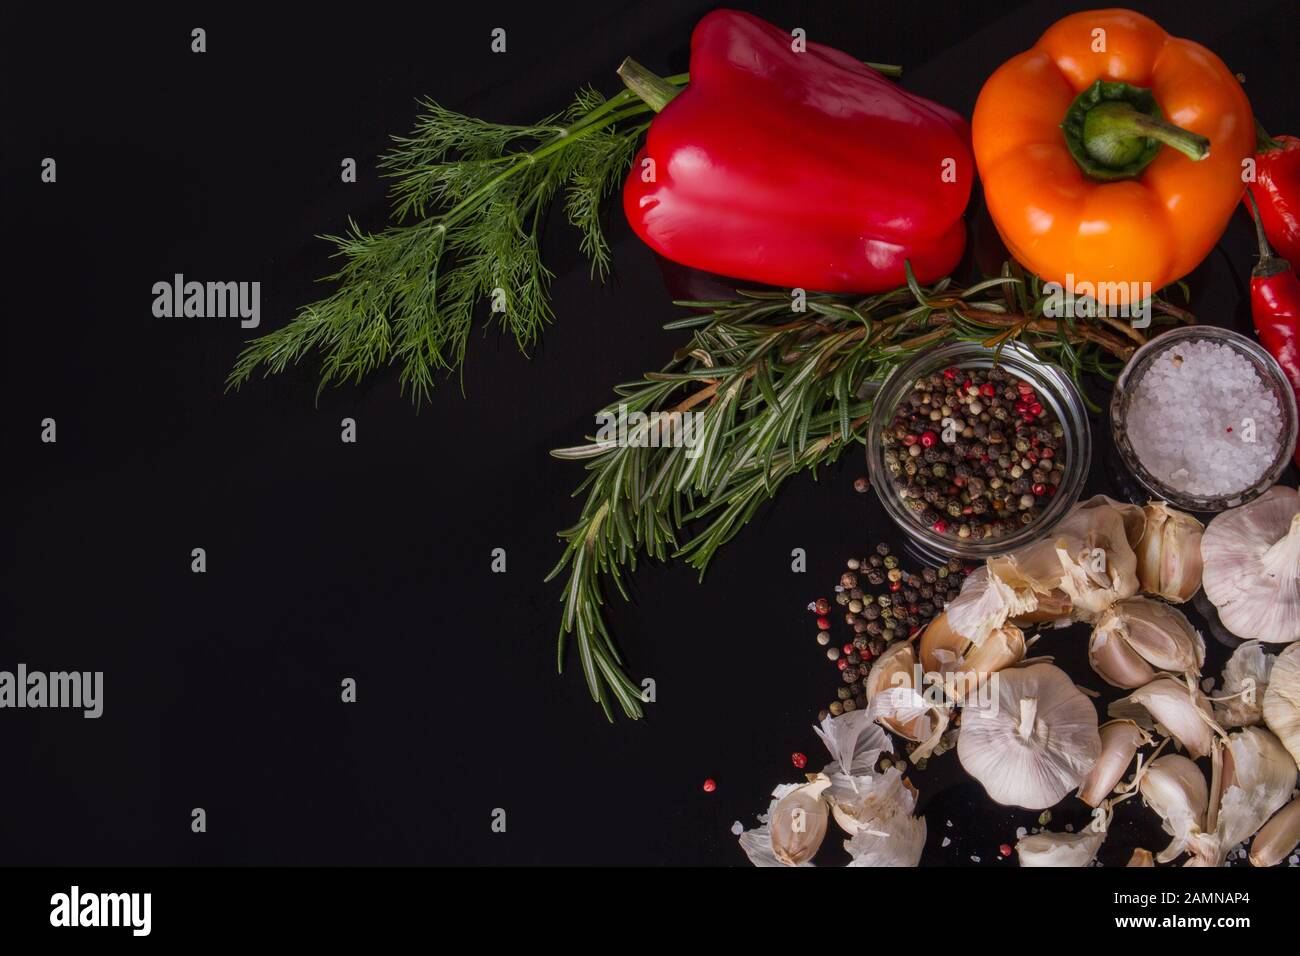 Herbs and multi-colour peppers. Stock Photo